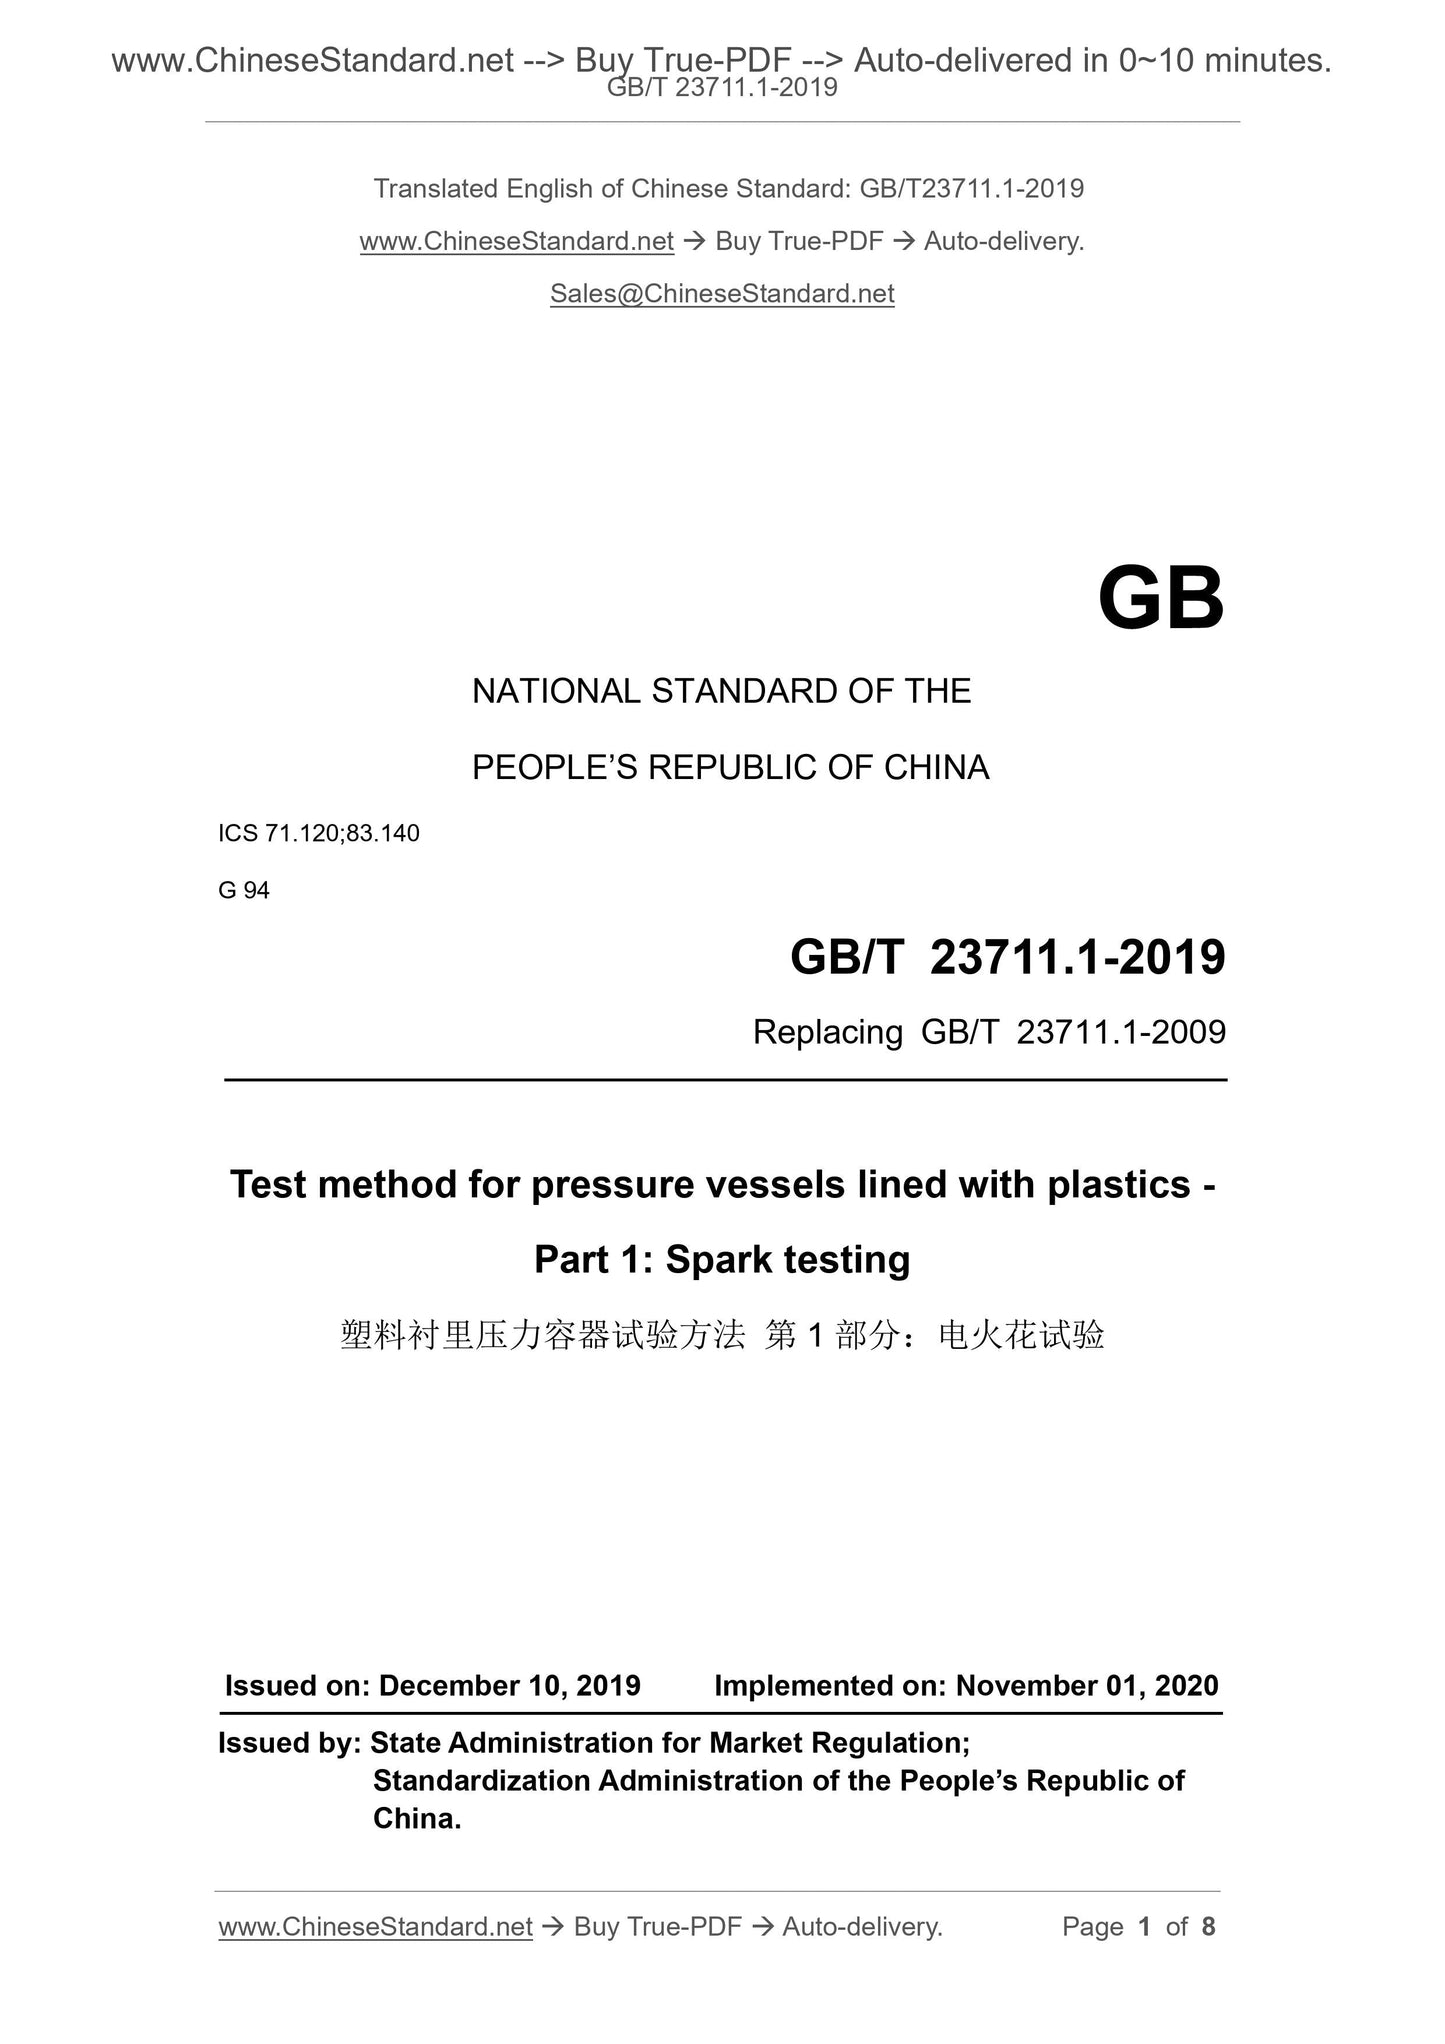 GB/T 23711.1-2019 Page 1